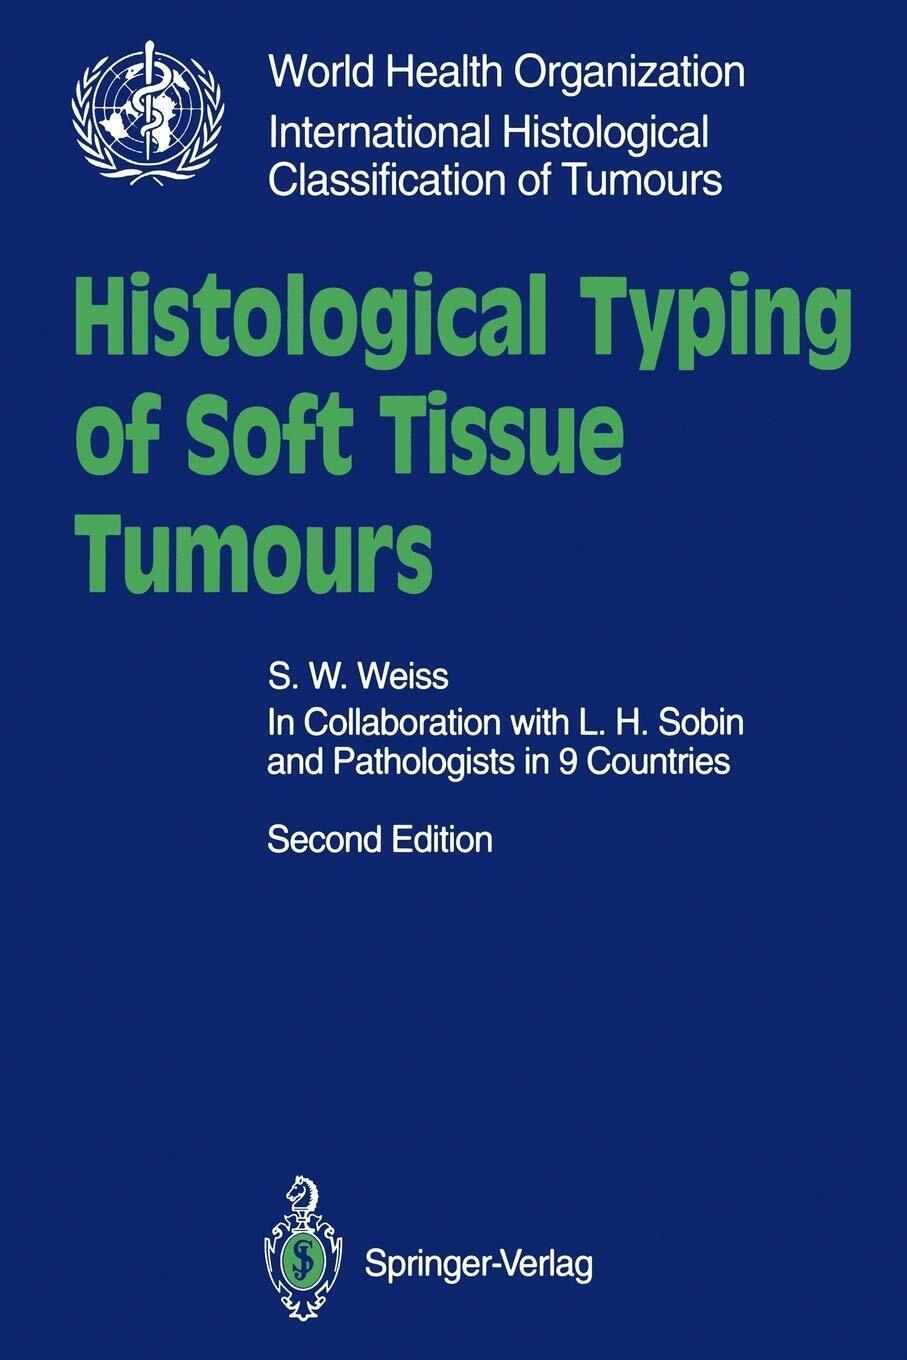 Histological Typing of Soft Tissue Tumours - S. W. Weiss - Springer, 1994